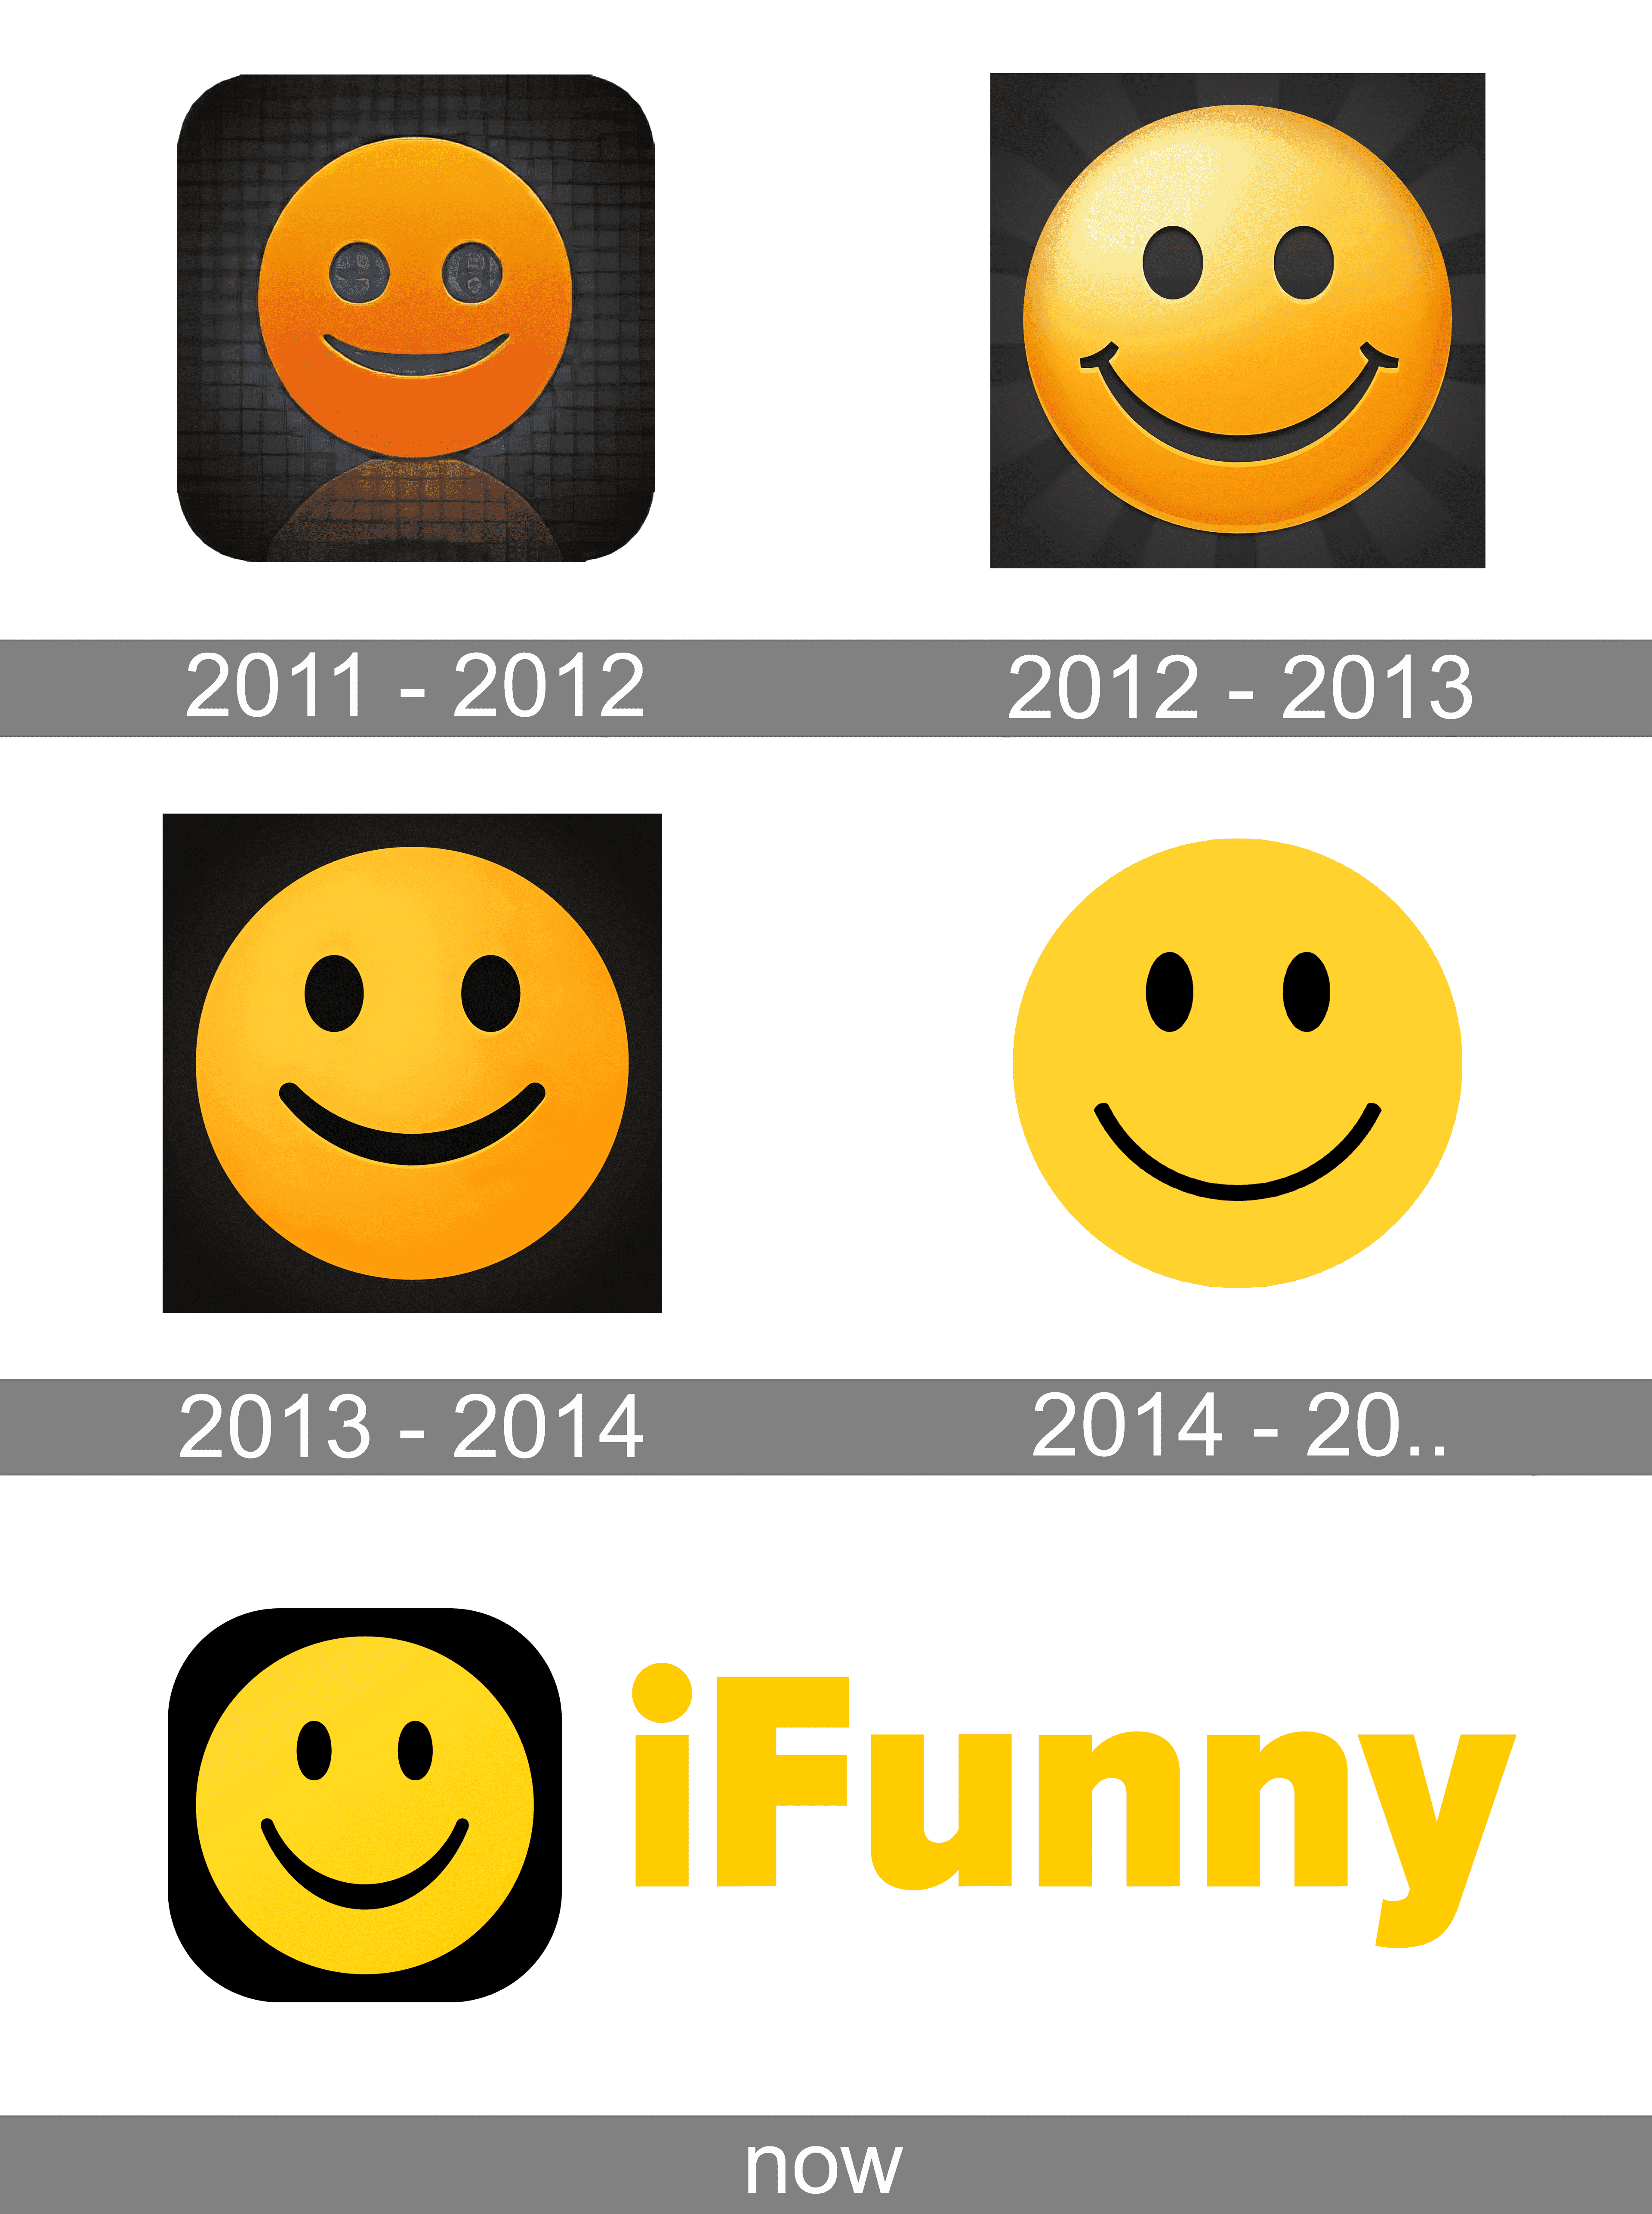 That's Funny You Should Mention That - Funny Face Logo Png Transparent PNG  - 450x450 - Free Download on NicePNG